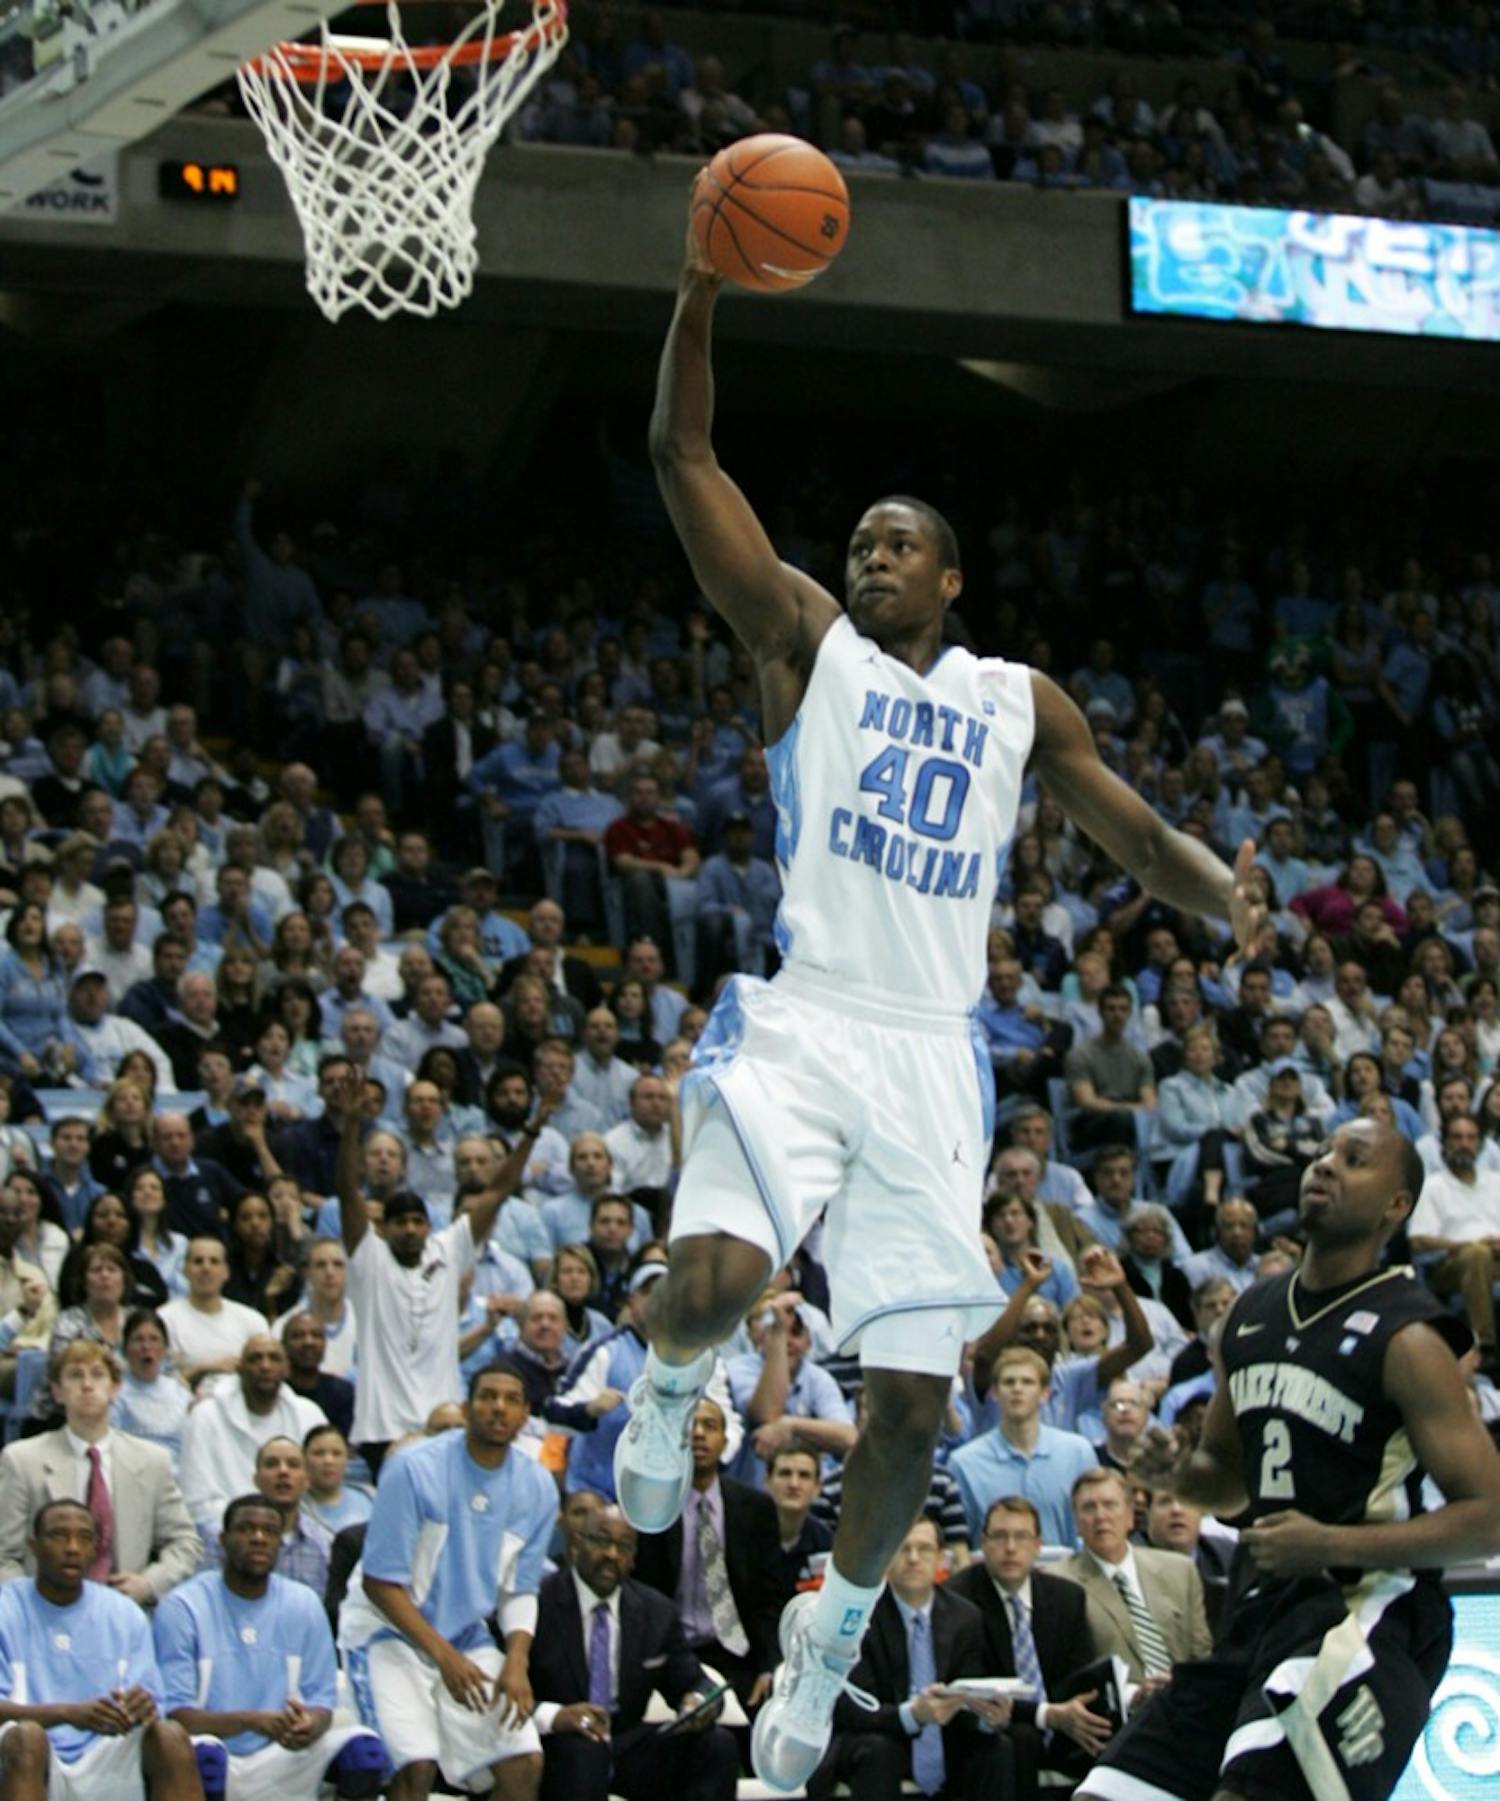 The University of North Carolina Tar Heels played the Wake Forest Demon Deacons on Tuesday, February 15, 2011 in The Dean E. Smith Center. 